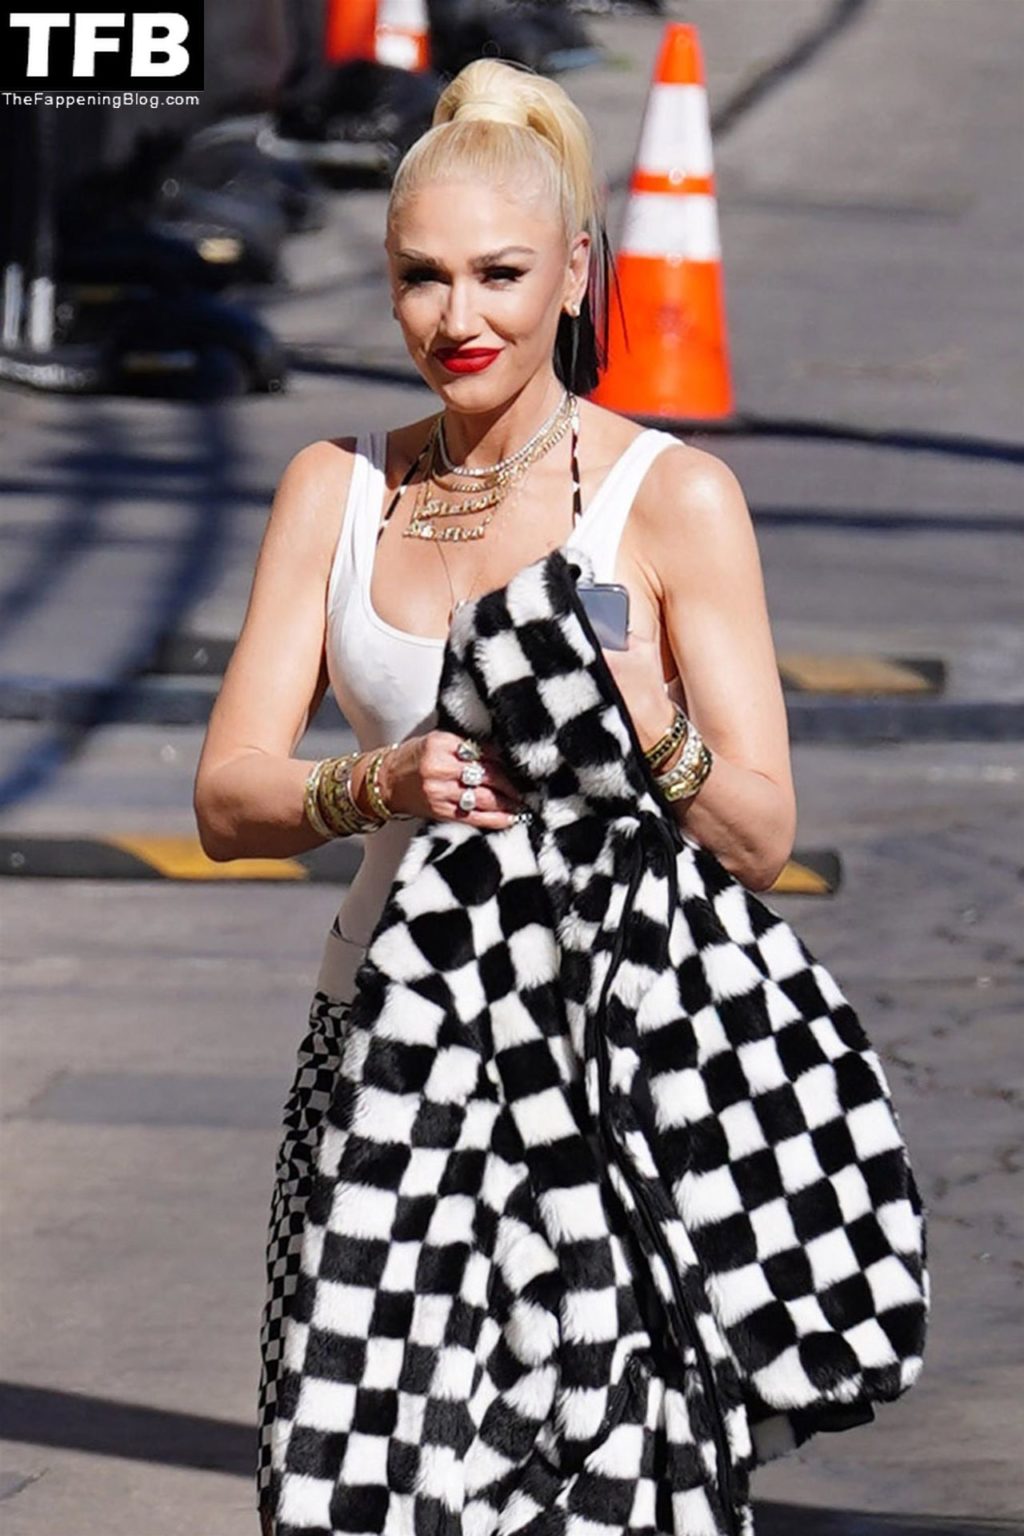 Gwen Stefani Sexy The Fappening Blog 37 1024x1536 - Gwen Stefani Arrives For an Appearance on Jimmy Kimmel Live! (87 Photos)